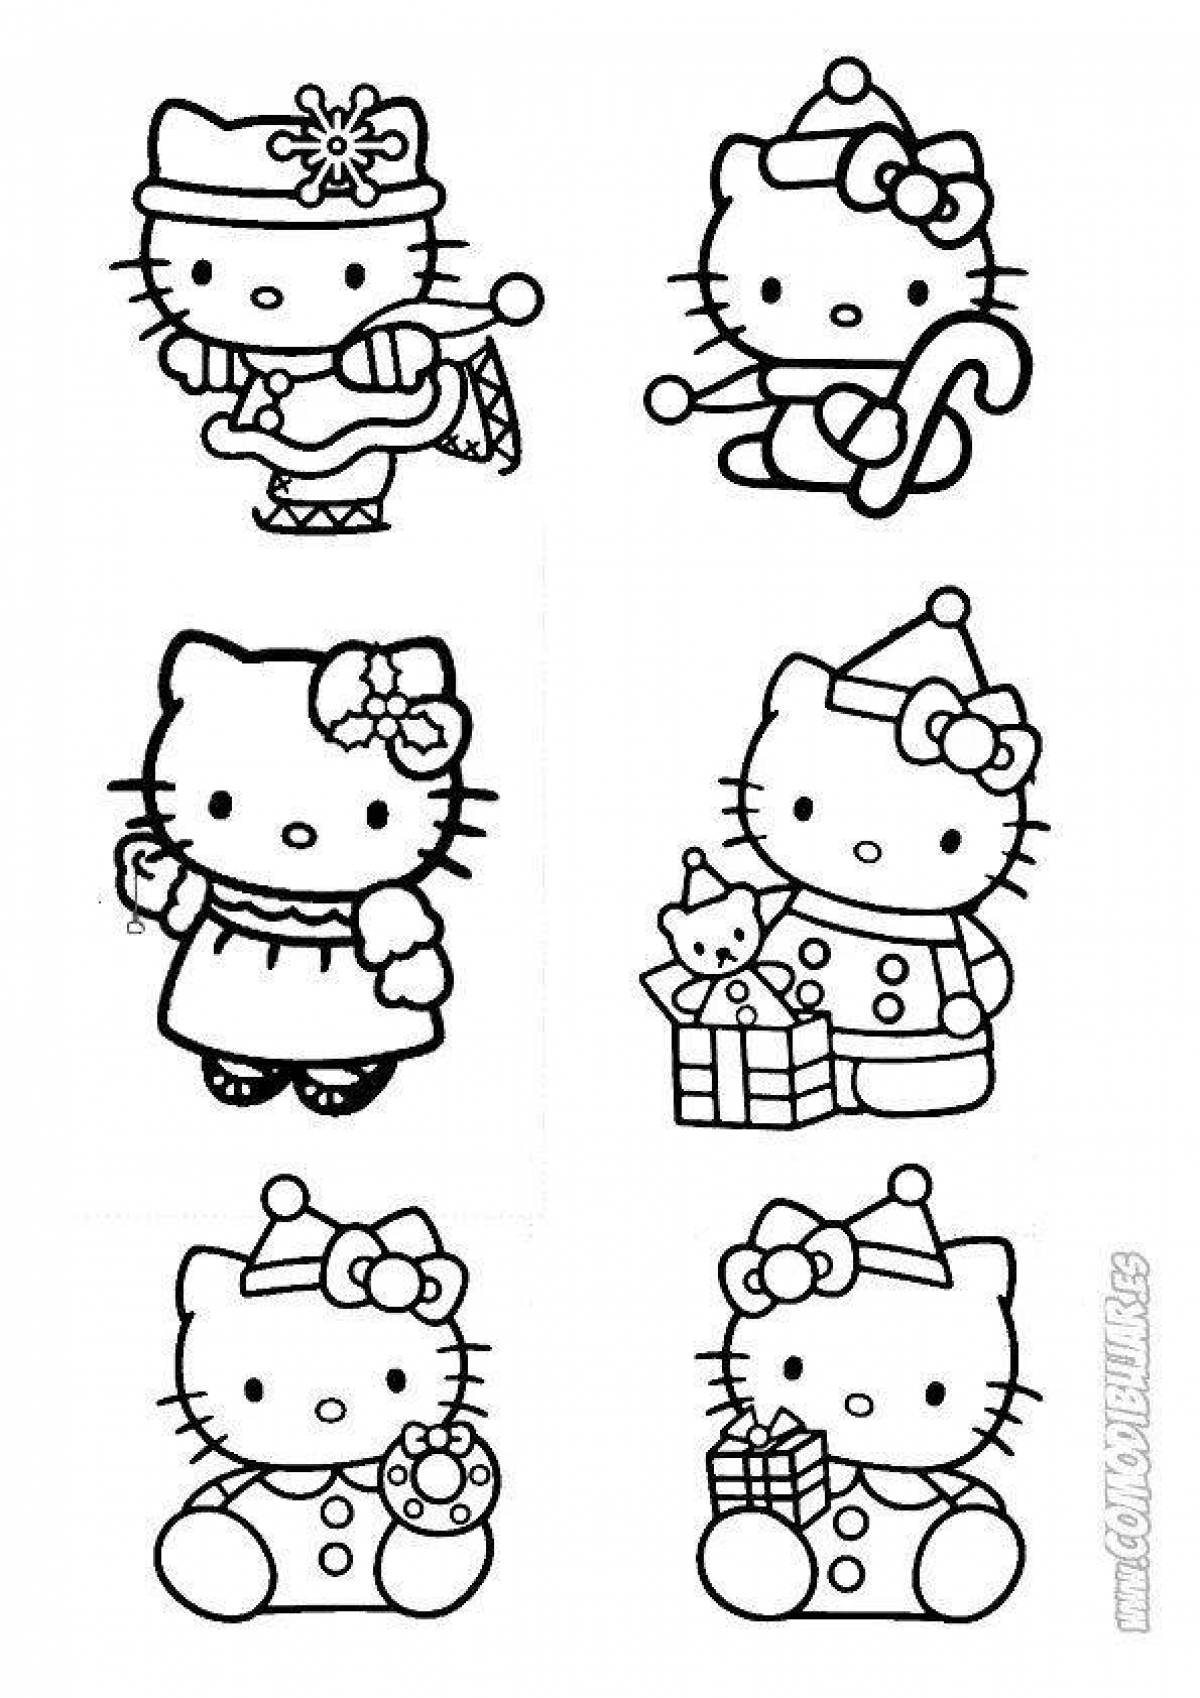 Exquisite hello kitty sticker coloring page